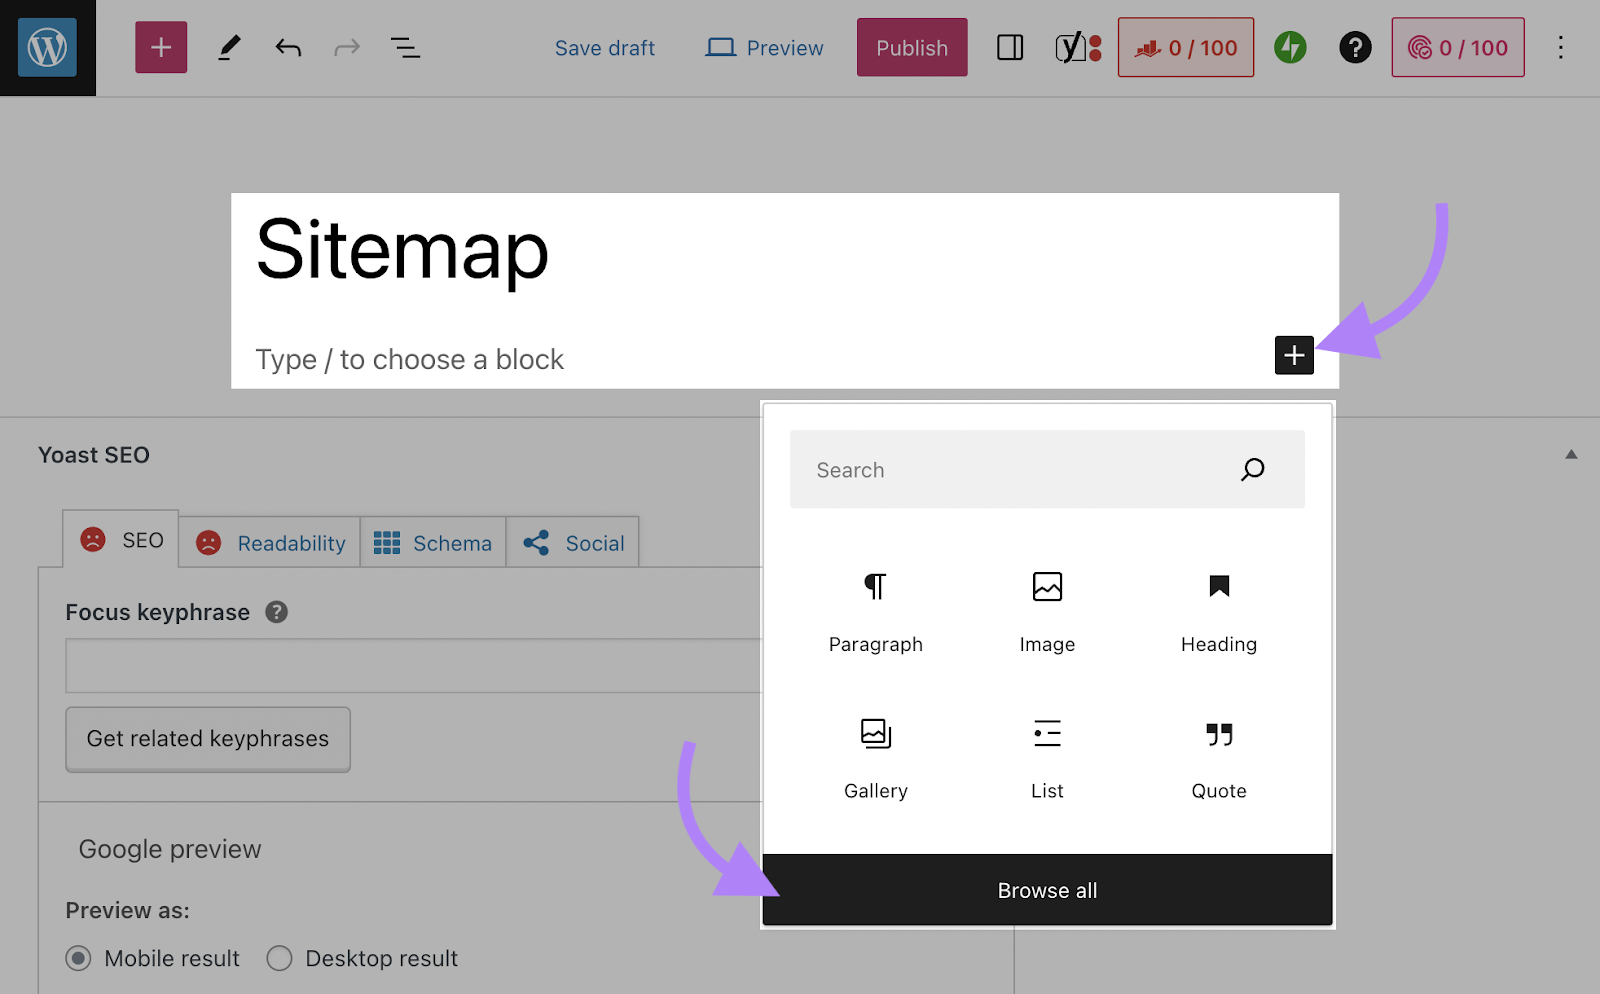 screenshot of a page with “Sitemap” title and adding a new block by clicking the plus icon